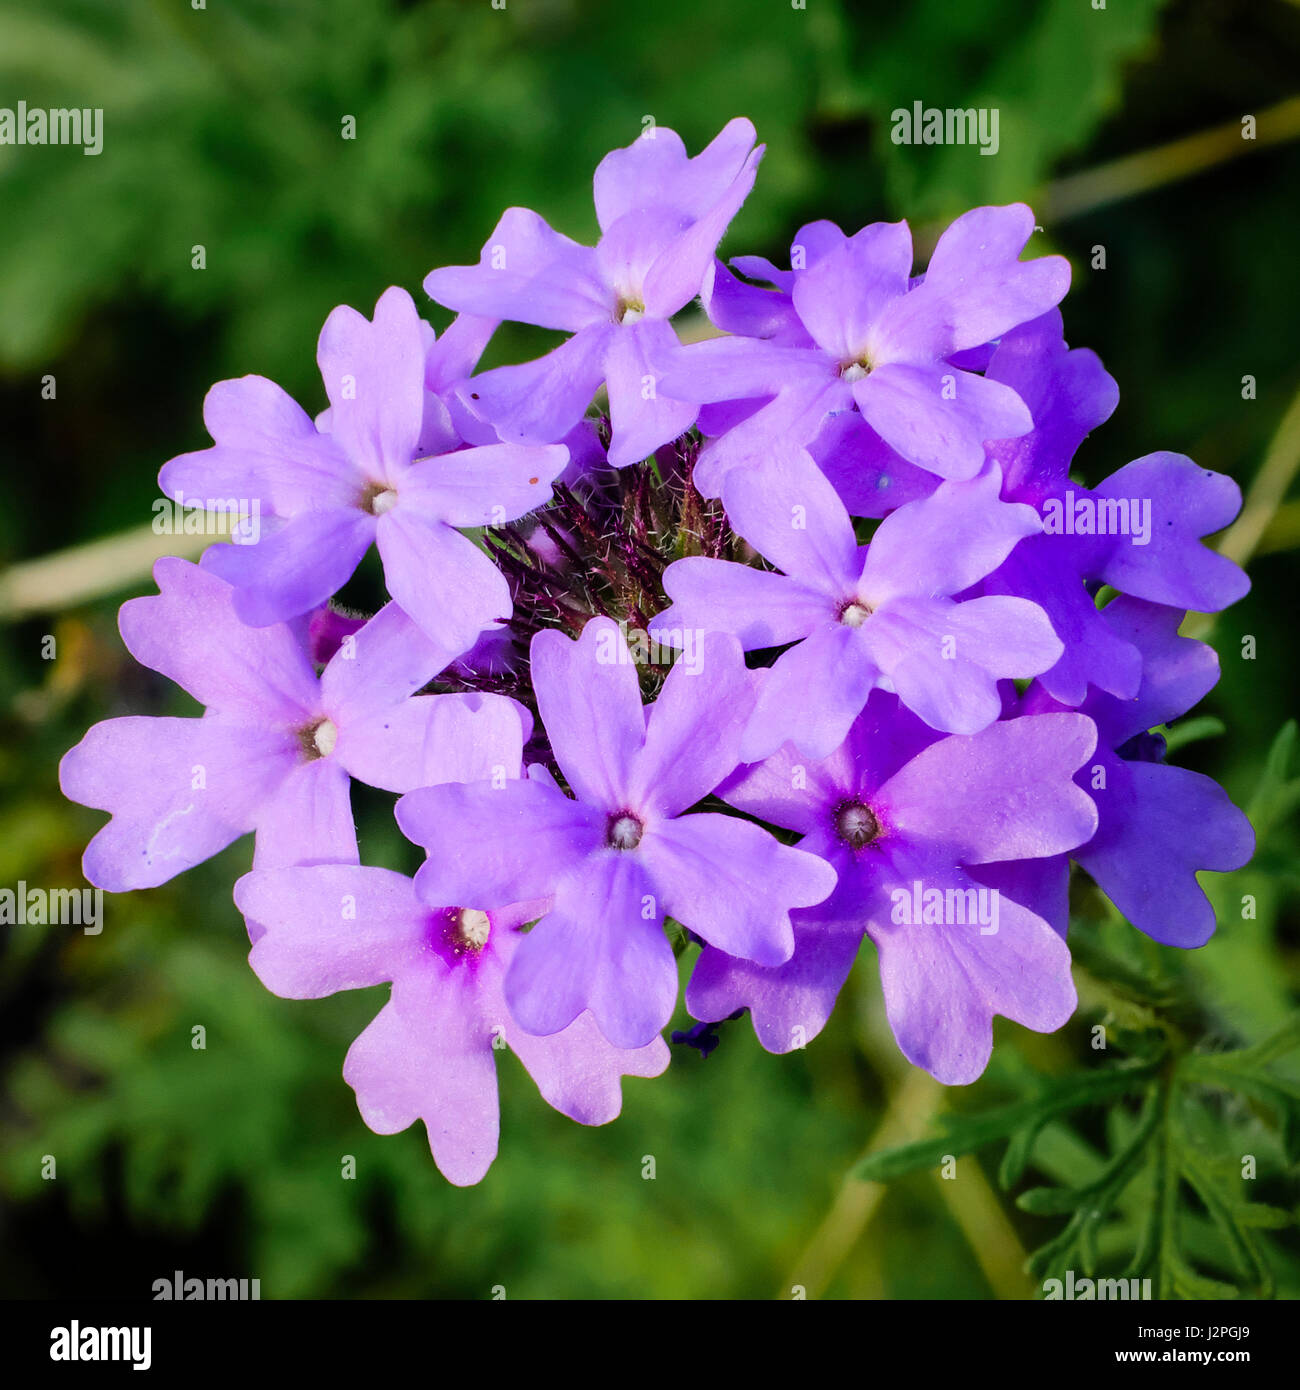 Prairie Verbena is a delicate purple wildflower common across Texas and other US states. Stock Photo